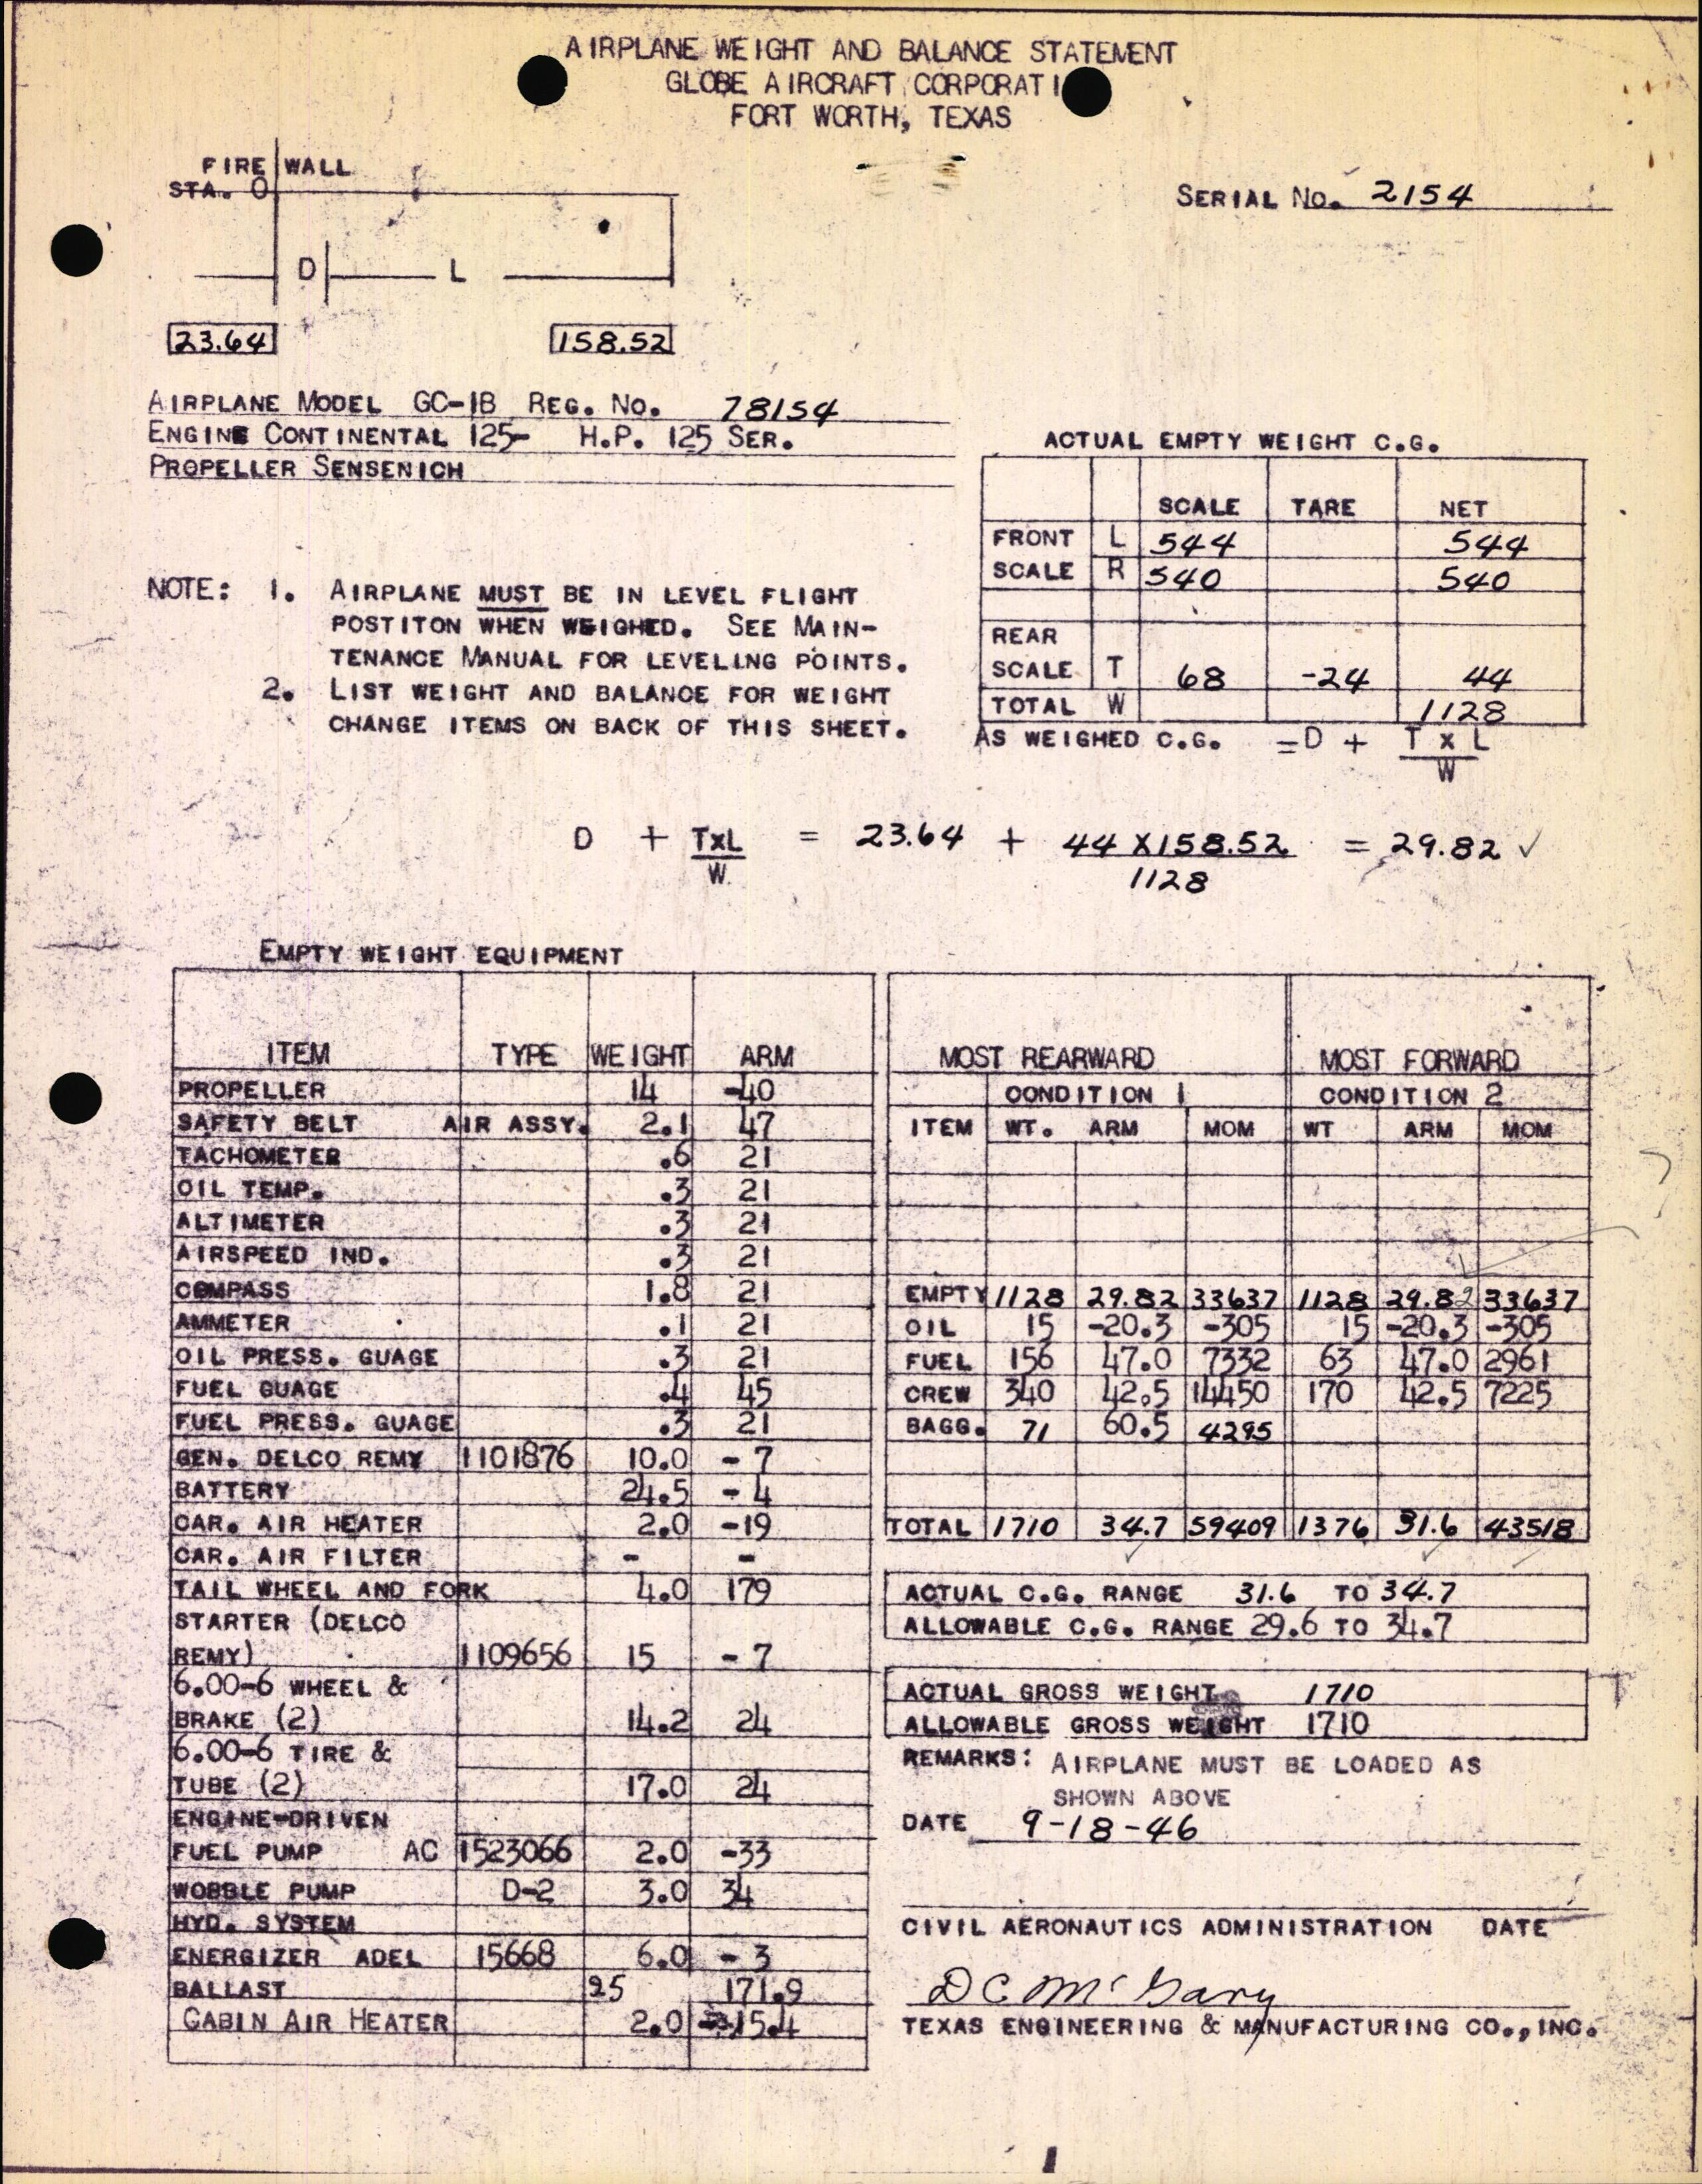 Sample page 1 from AirCorps Library document: Technical Information for Serial Number 2154